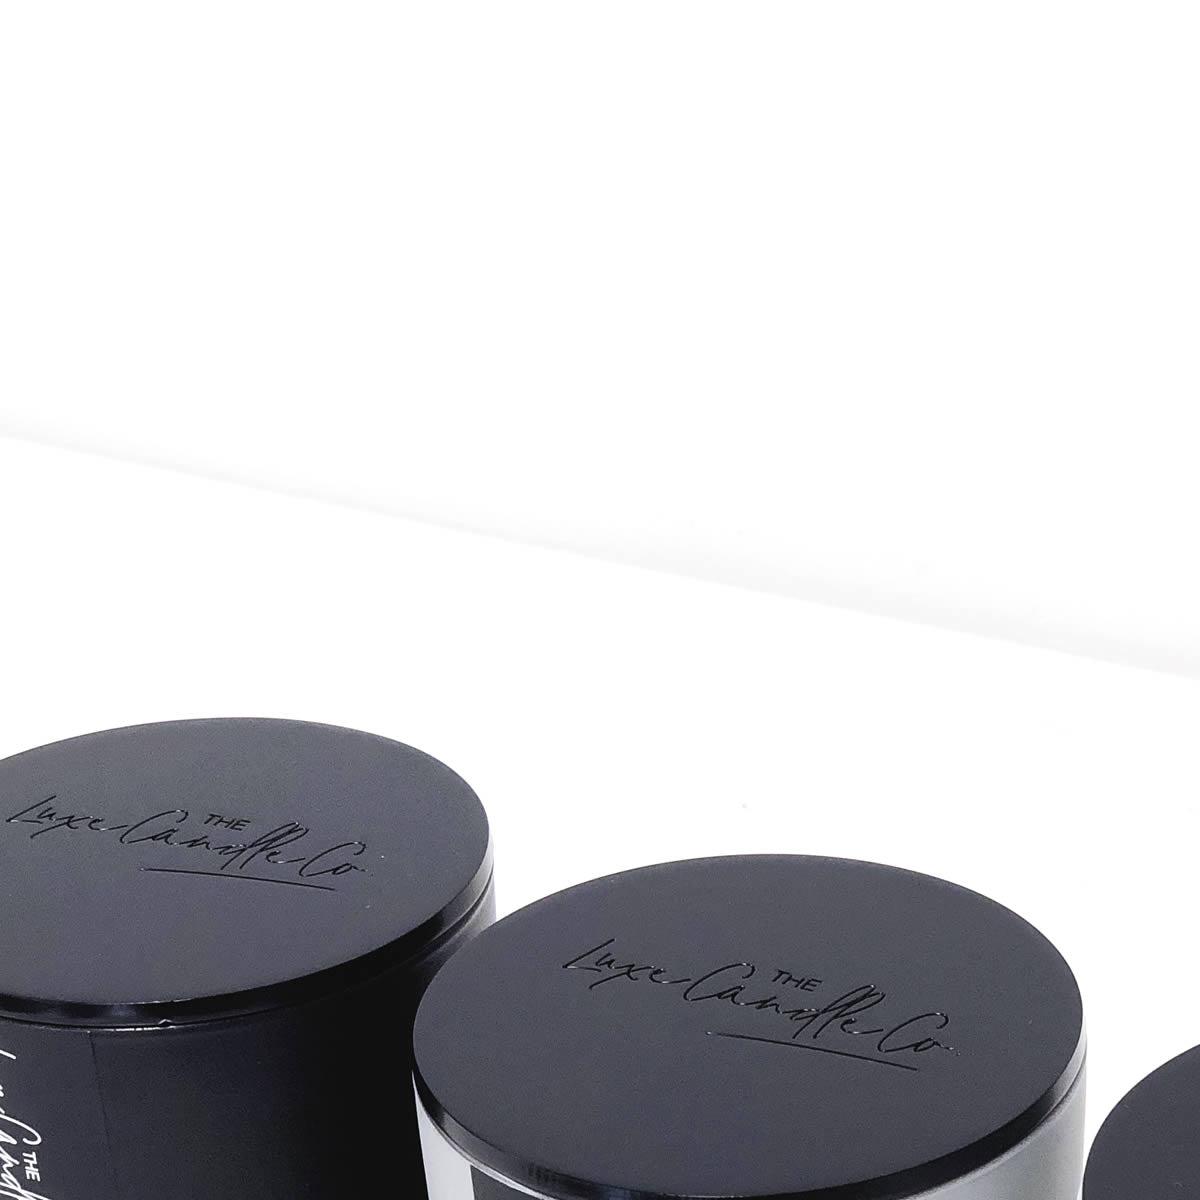 Black Candle with black metal lid - to protect candle when not in use + protect surface from heat damage by The Luxe Candle co